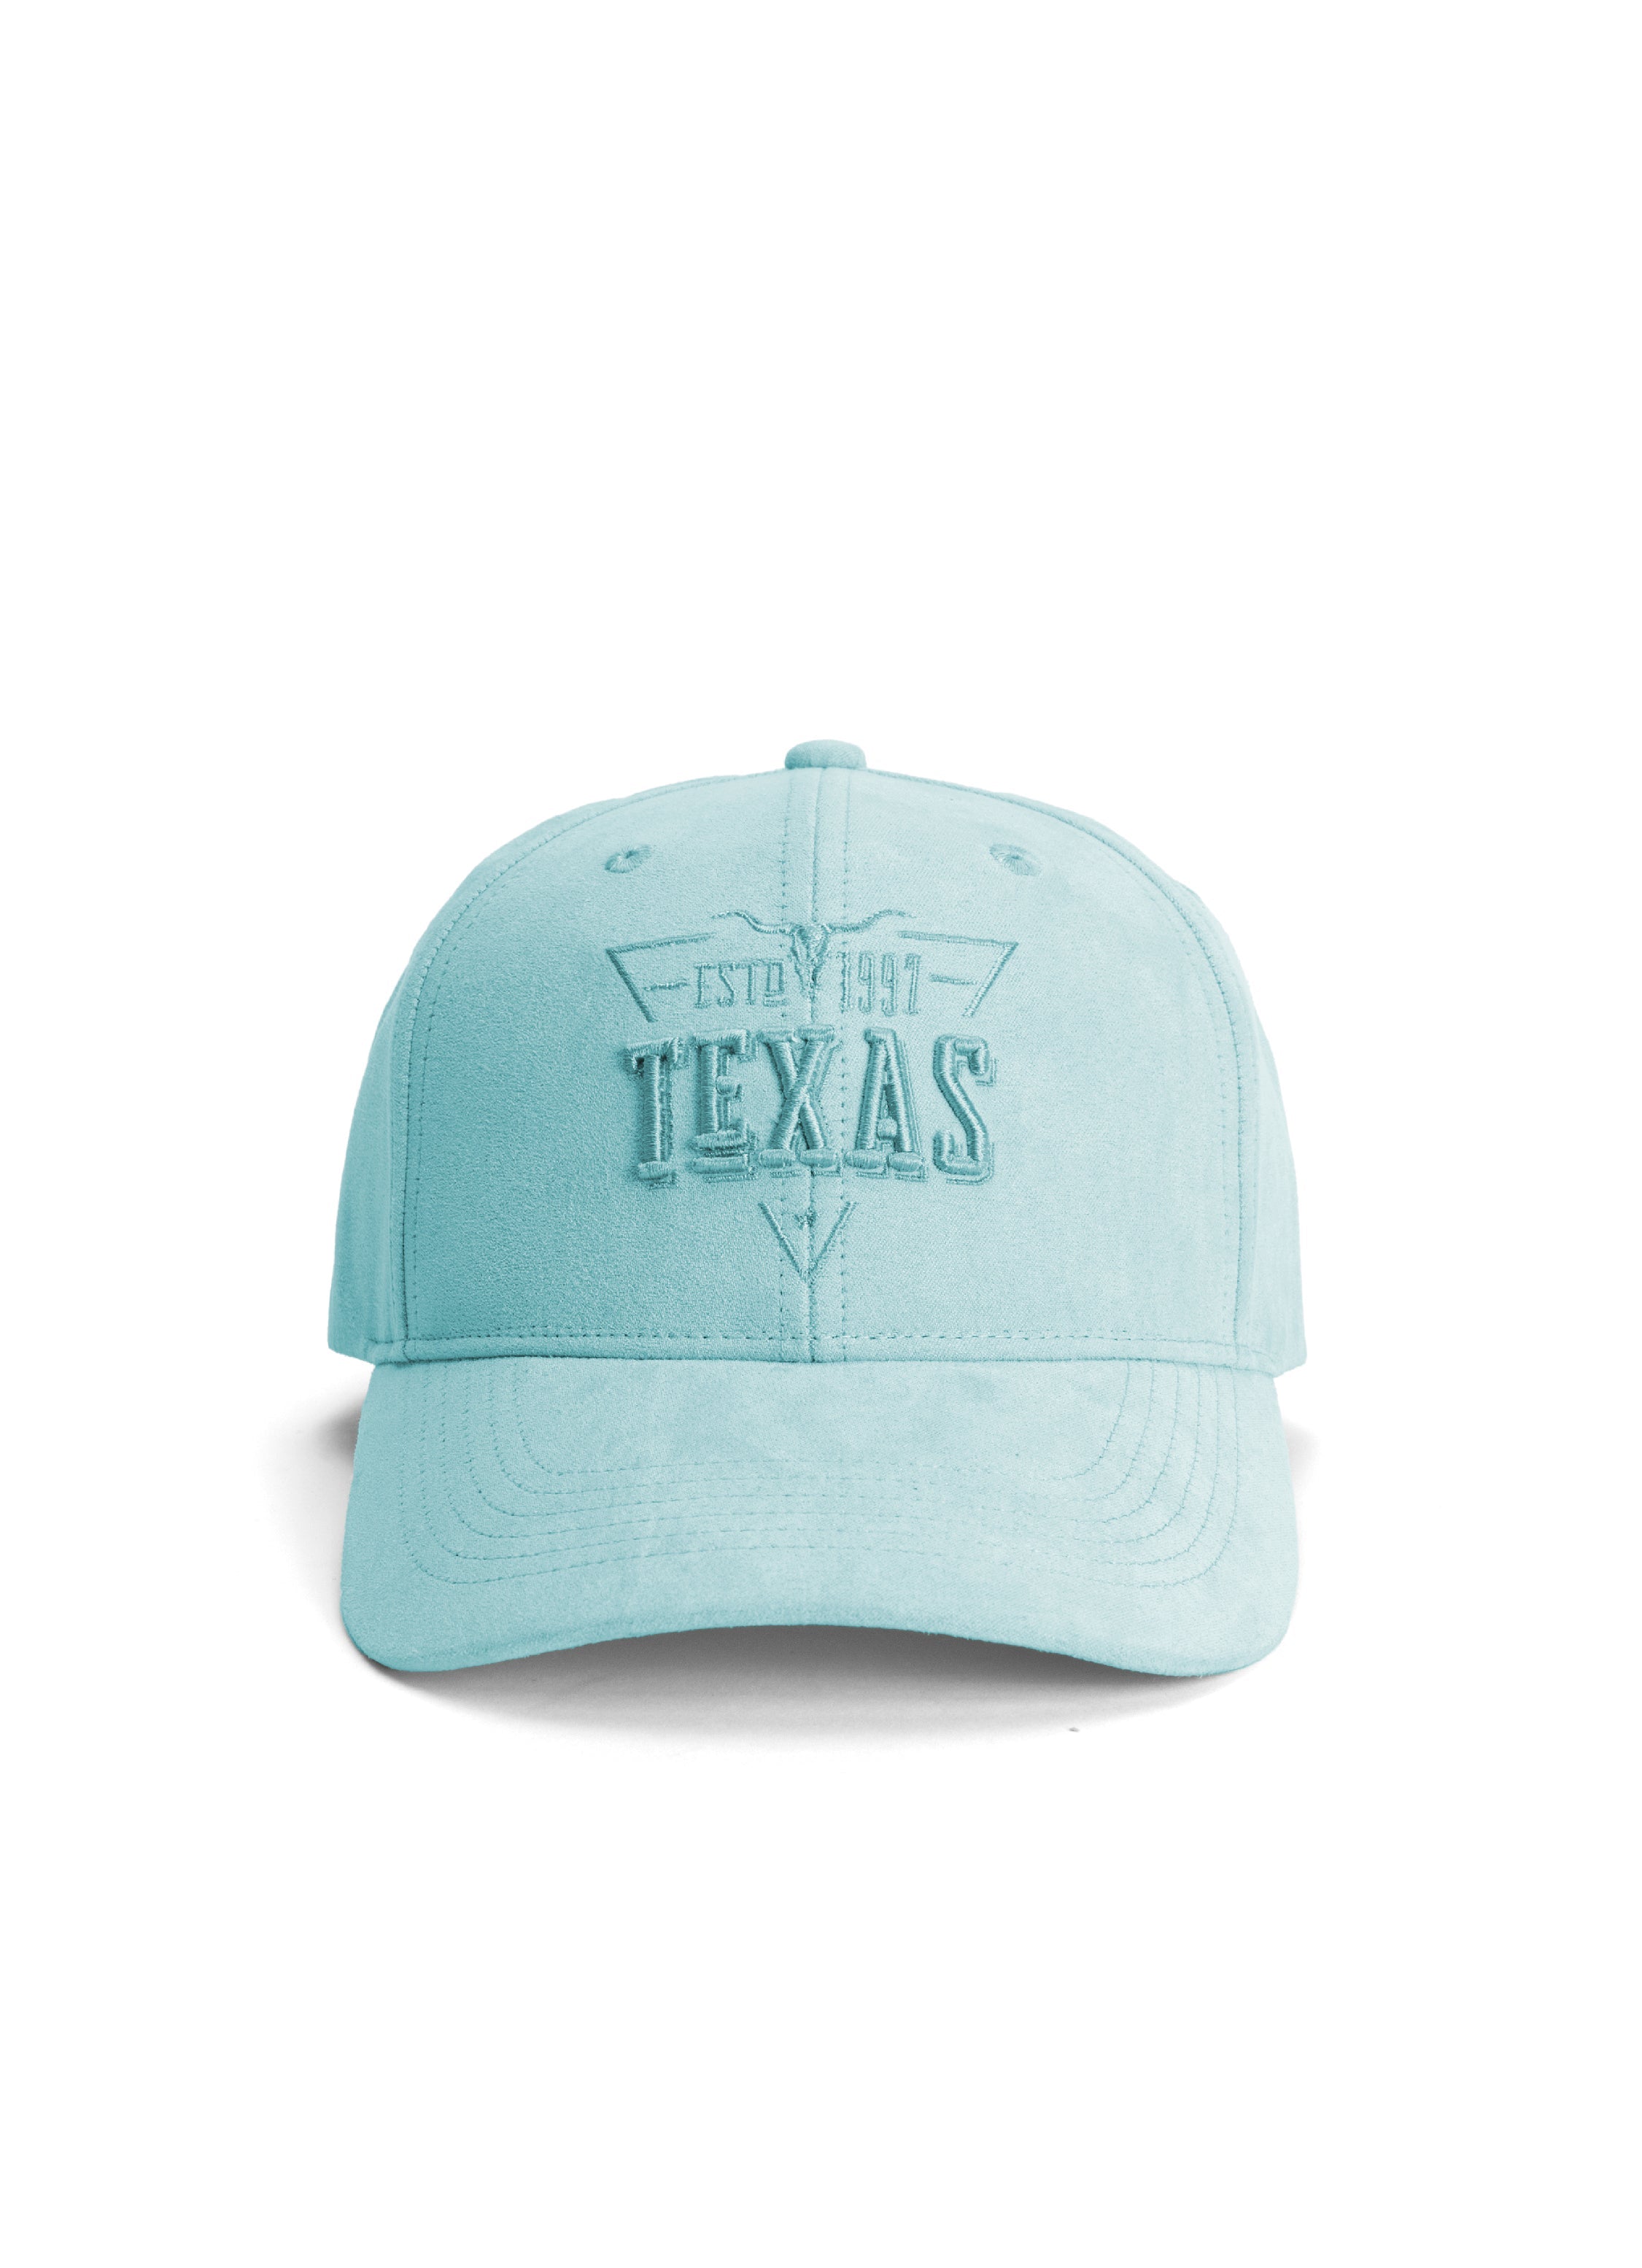 Buy The 97th Hour 97thhour Texas Blue Cap Front Look